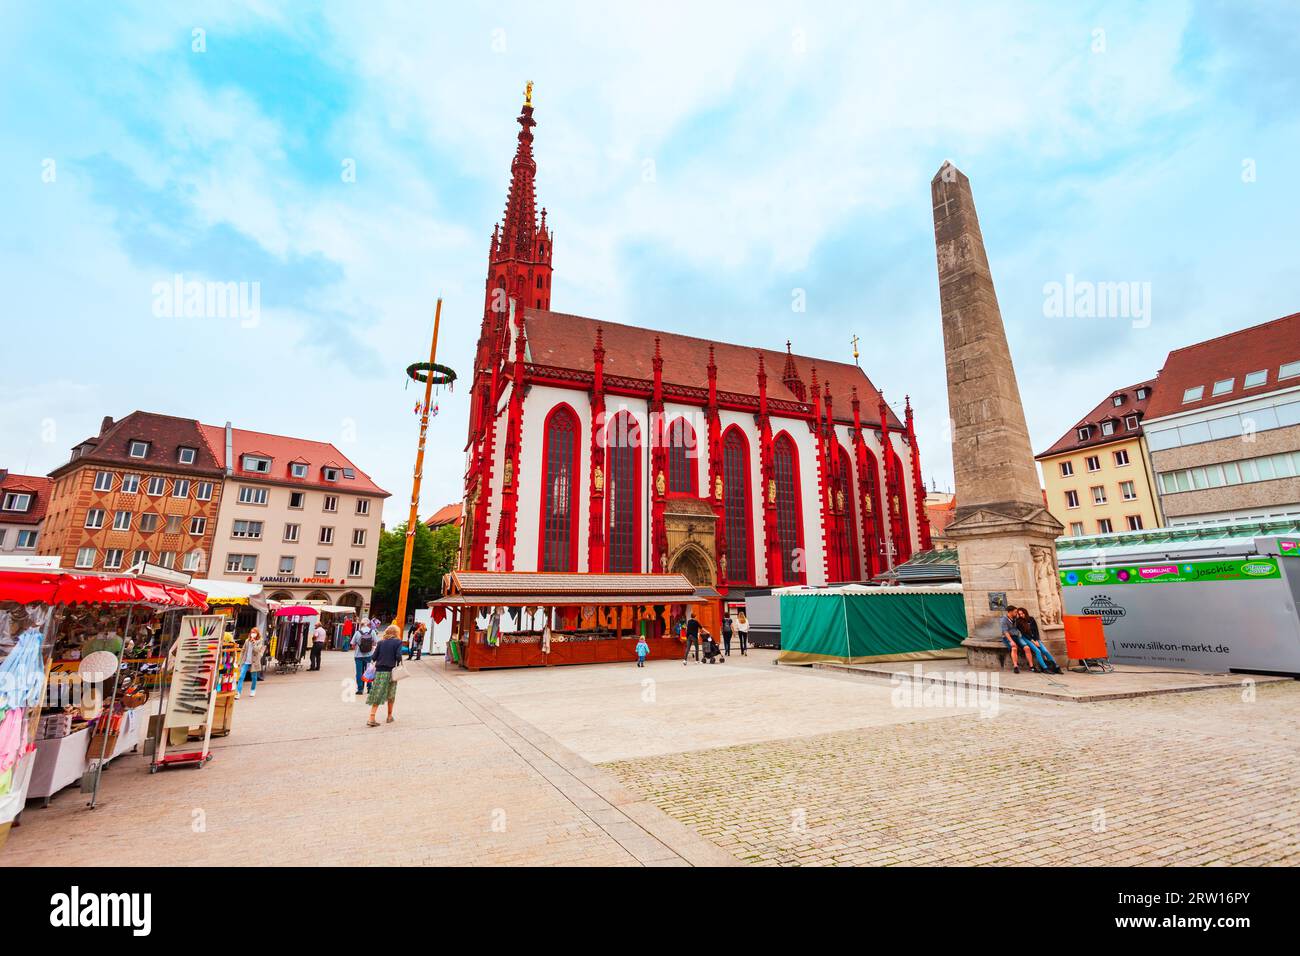 Wurzburg, Germany - July 11, 2021: Marienkapelle or St. Mary Church. Marienkapelle is located in Wurzburg old town in Bavaria, Germany. Stock Photo